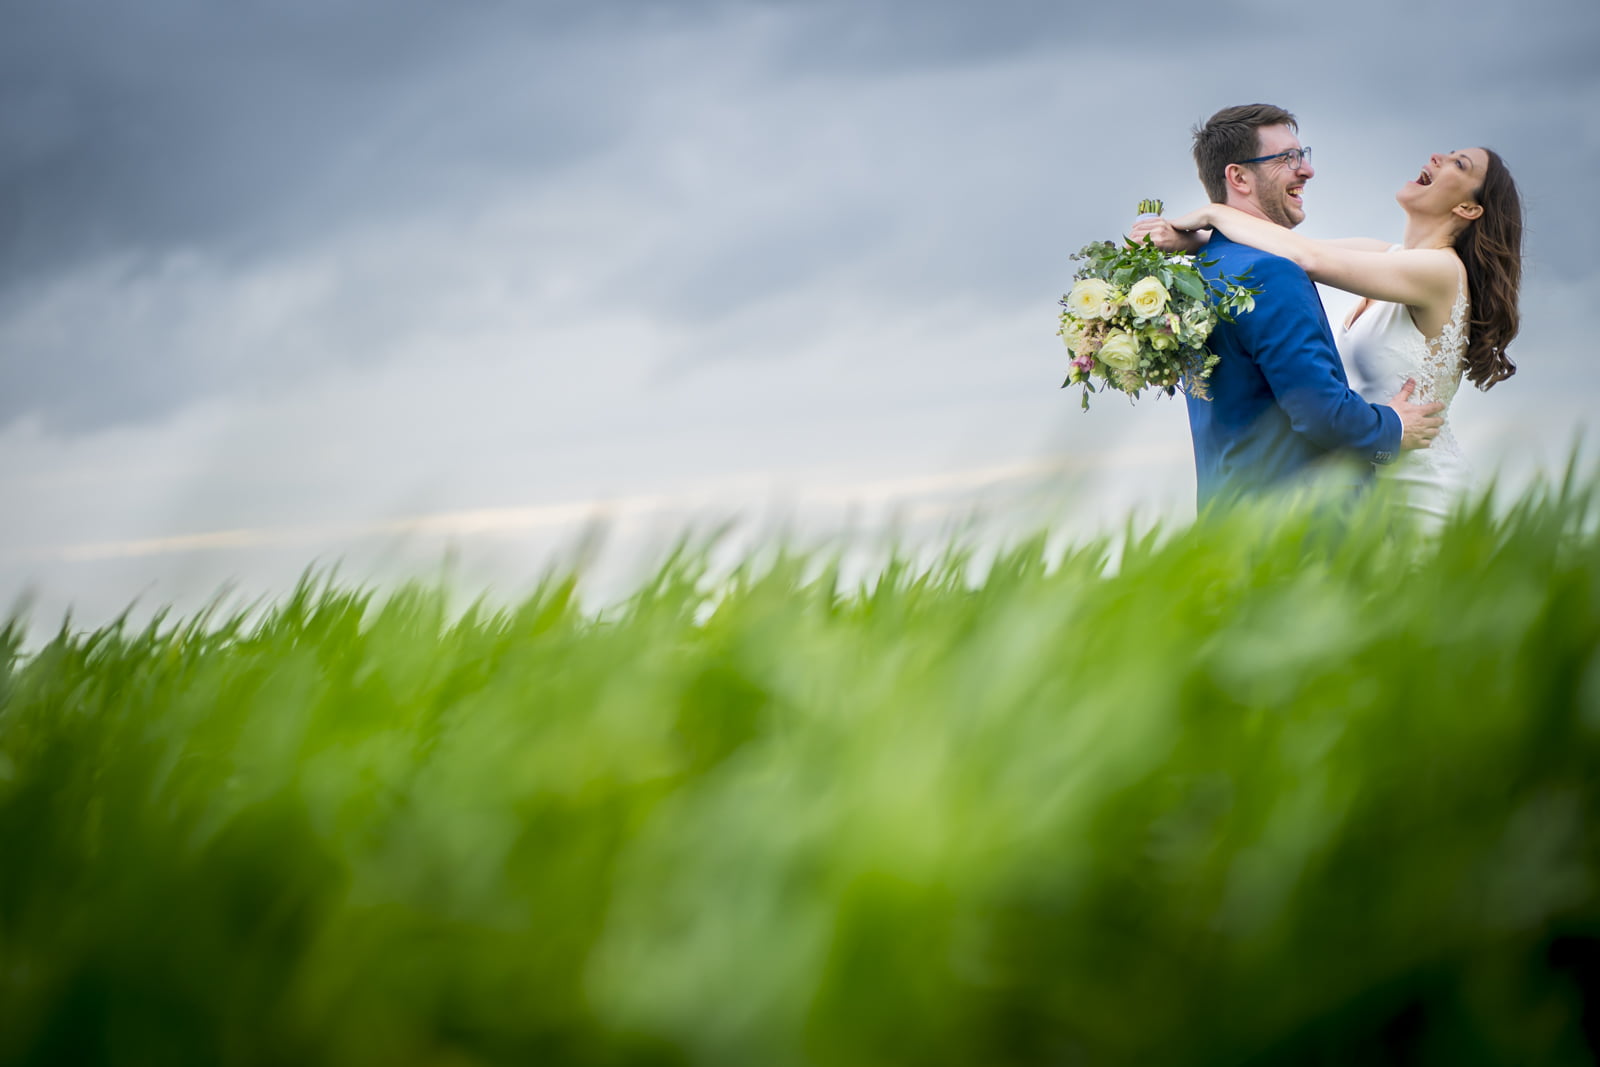 The bride and groom embrace in a field in the middle of nowhere